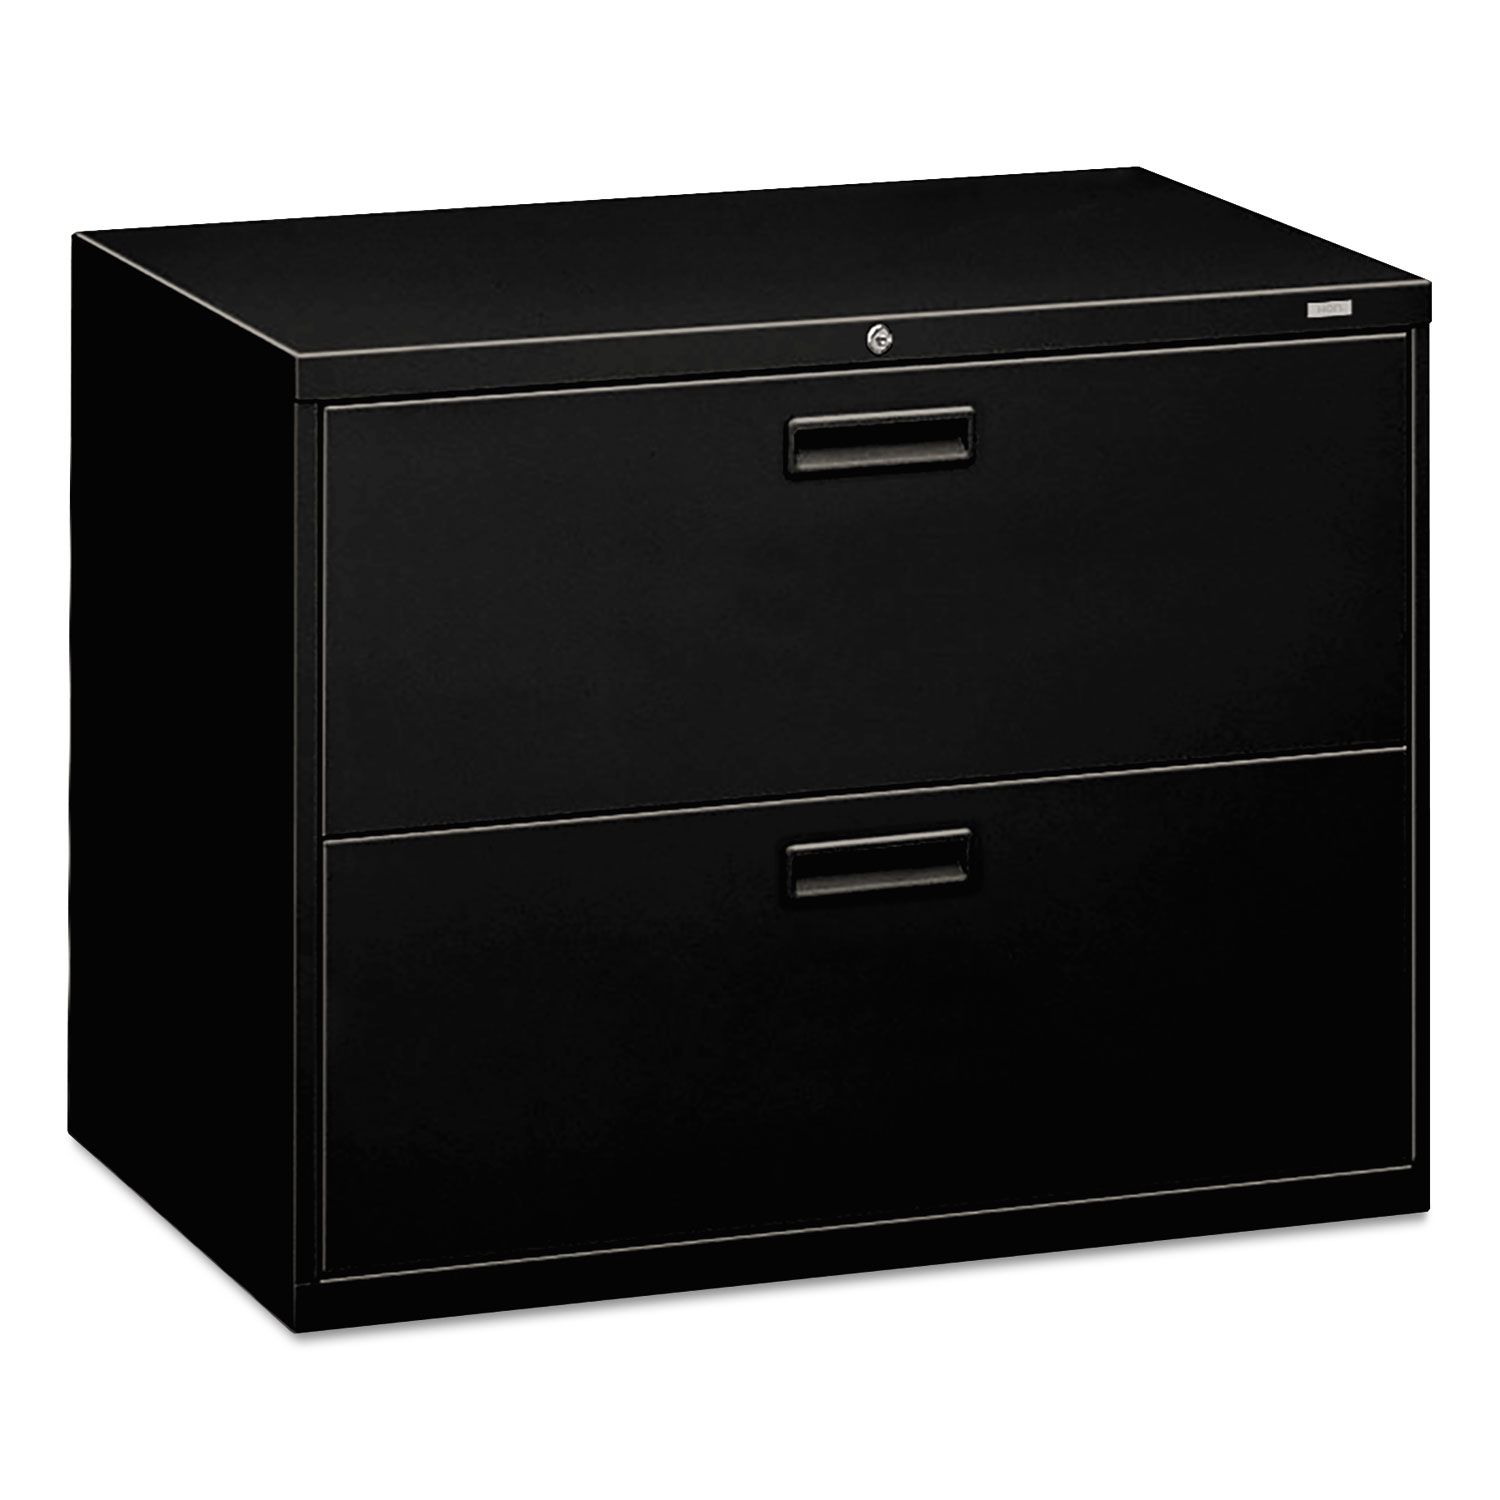 500 Series Two-Drawer Lateral File, 36w x 18d x 28h, Black